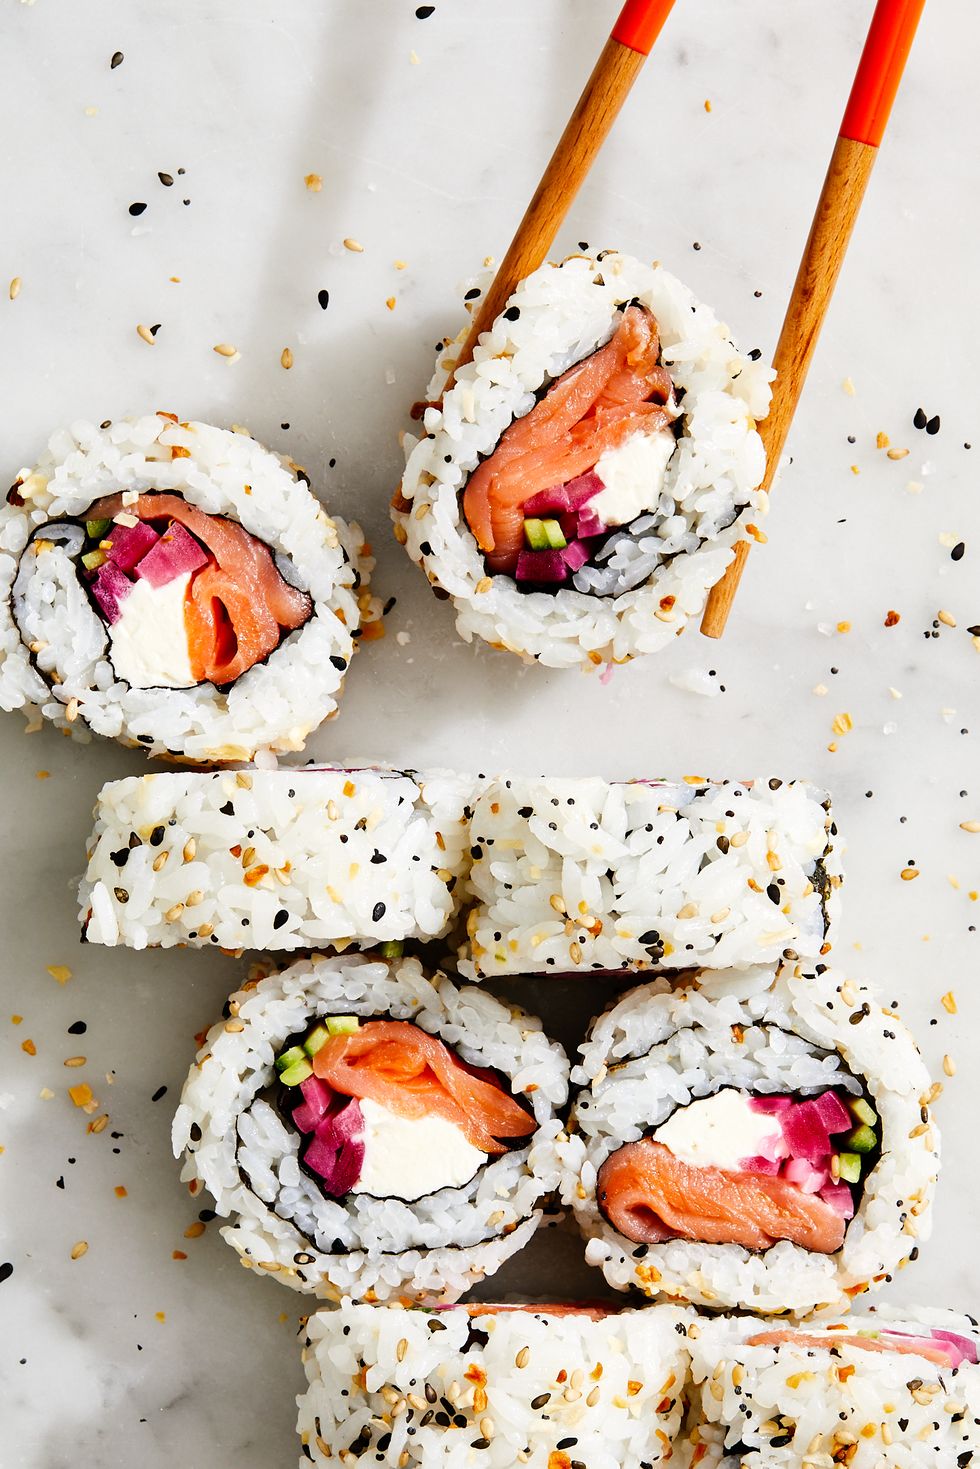 5 Inventive Sushi recipes you can try at home – ENSO Japanese Cuisine